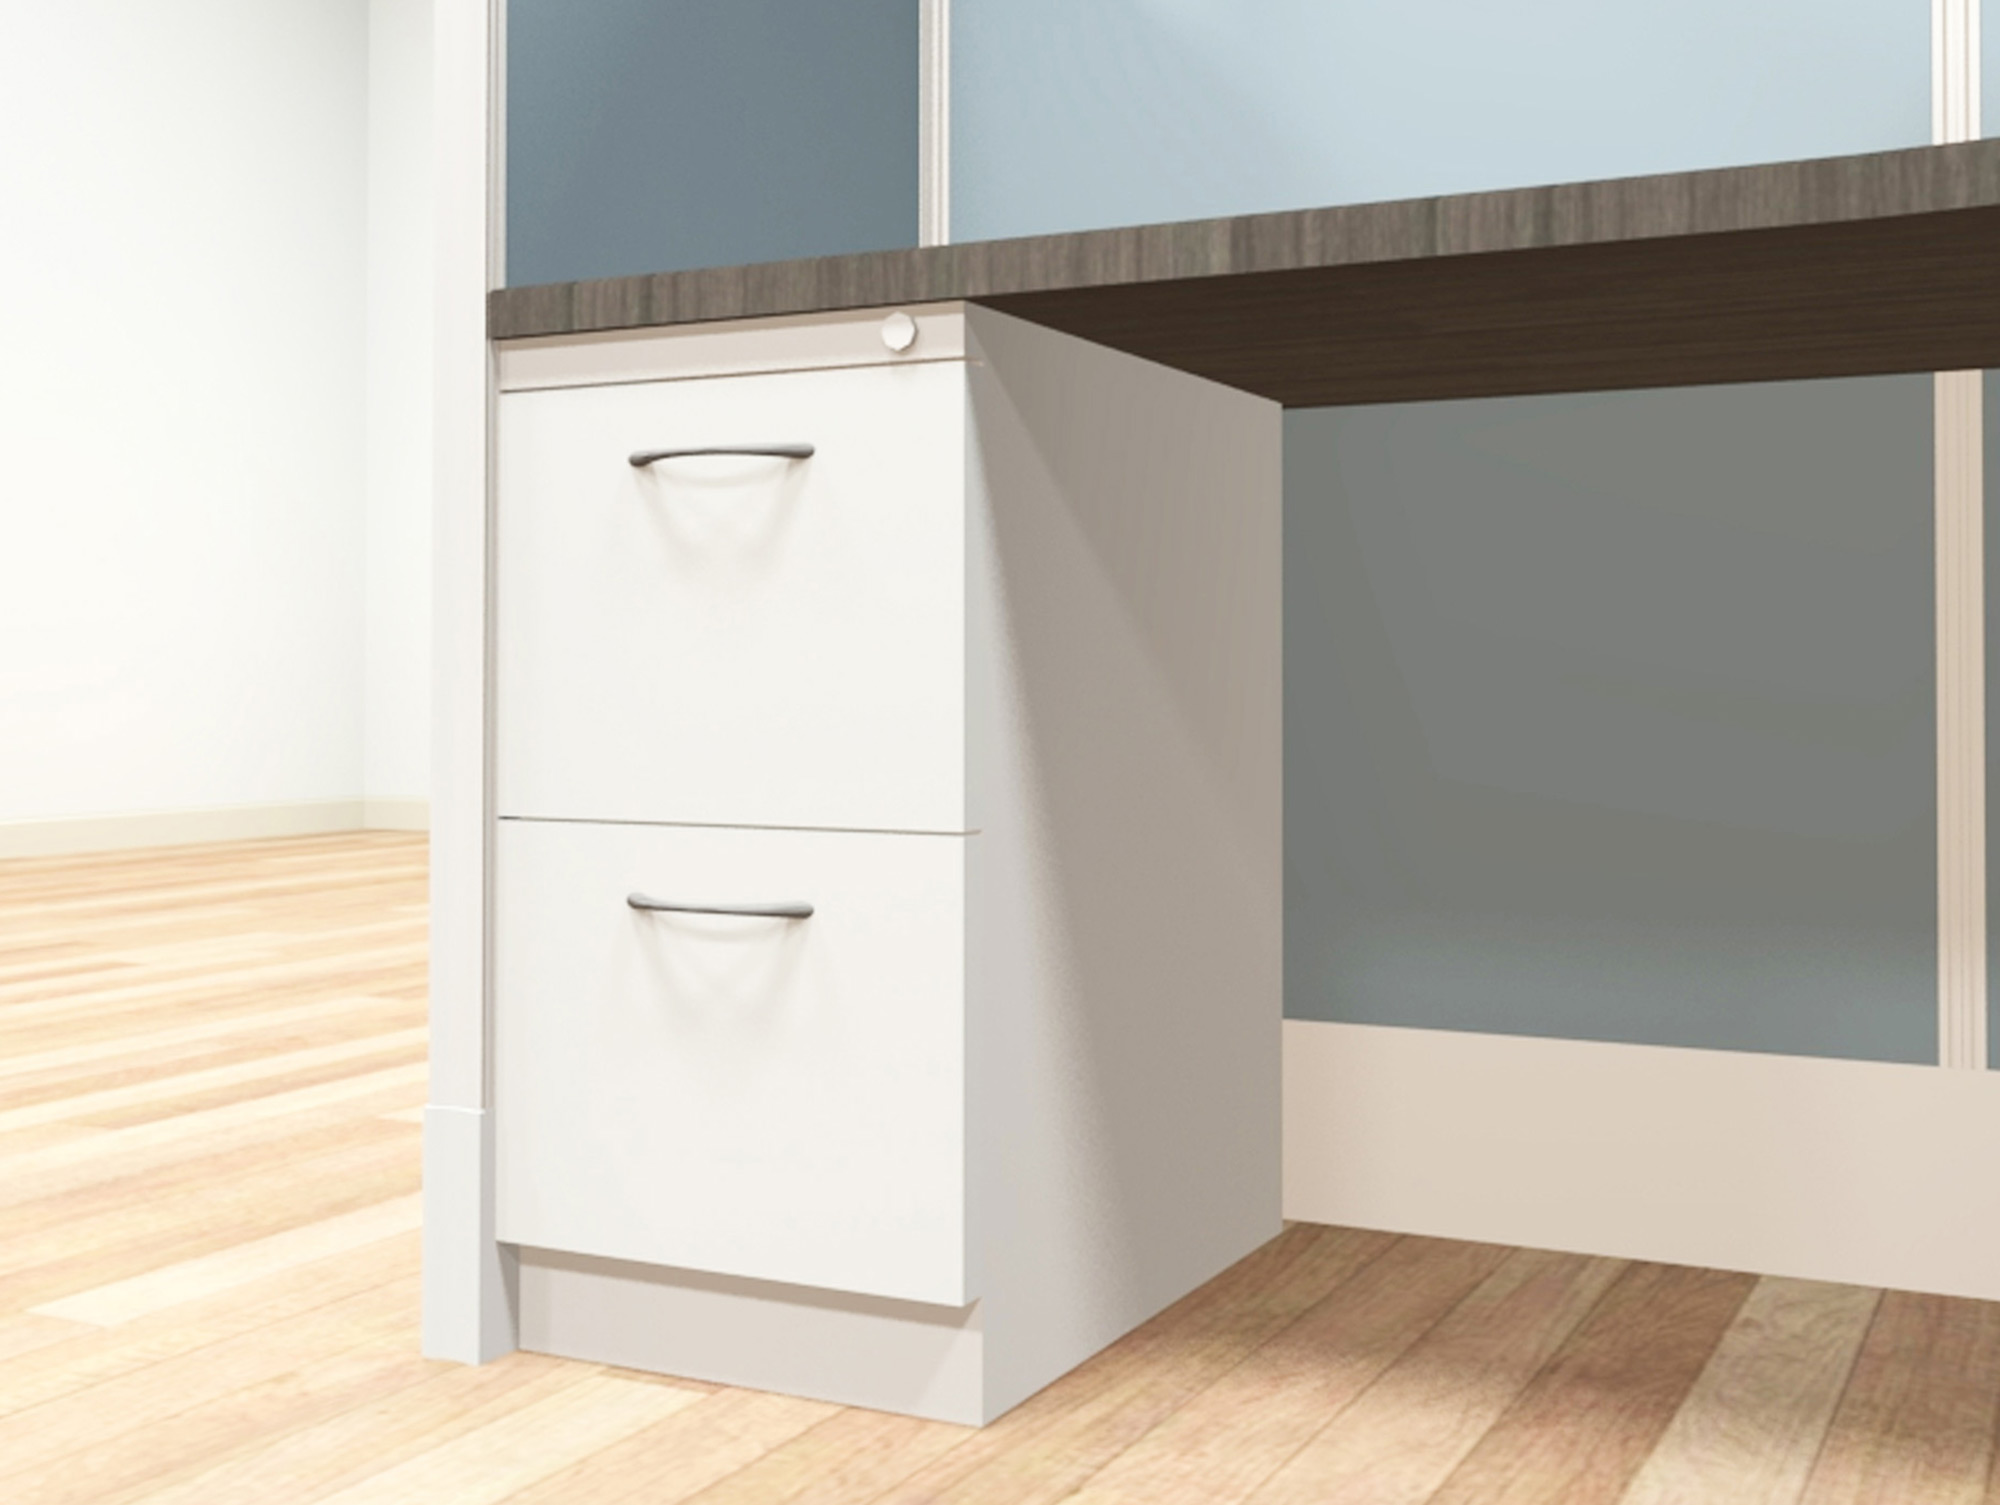 8x8 modular workstations from AIS - a ï¿½file-fileï¿½ pedestal is an under-surface storage cabinet with two deep drawers designed for hanging files. Lock and key secures all drawers from unwanted visitors.